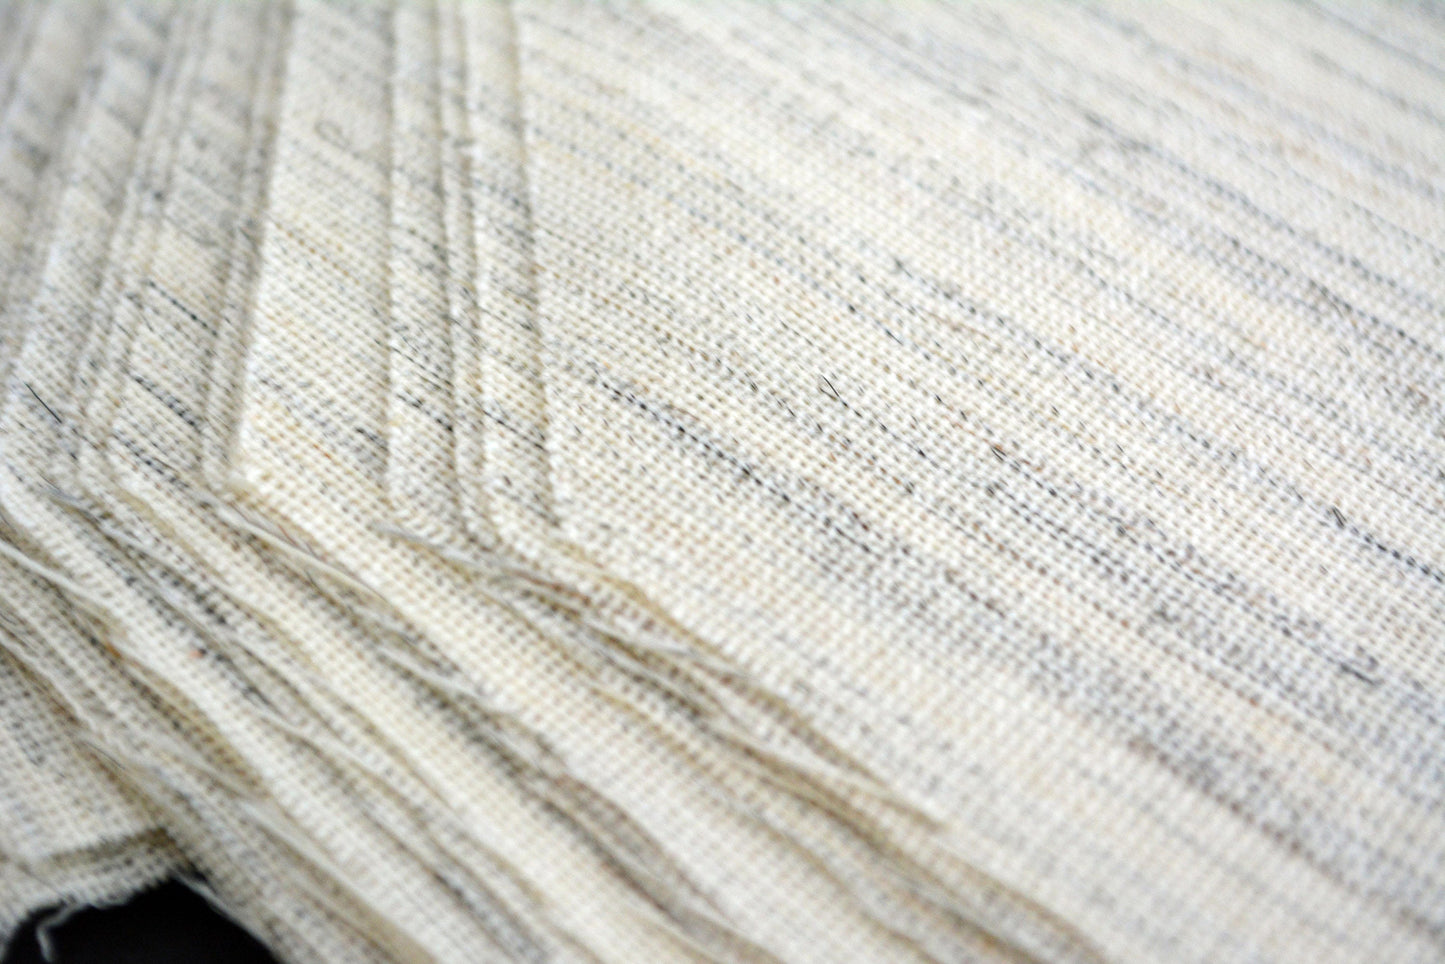 PRE-CUT 3 3/4" wide Wool + Goat Hair necktie interfacing / interlining - AC Ter Kuile, finest available, Made Netherlands